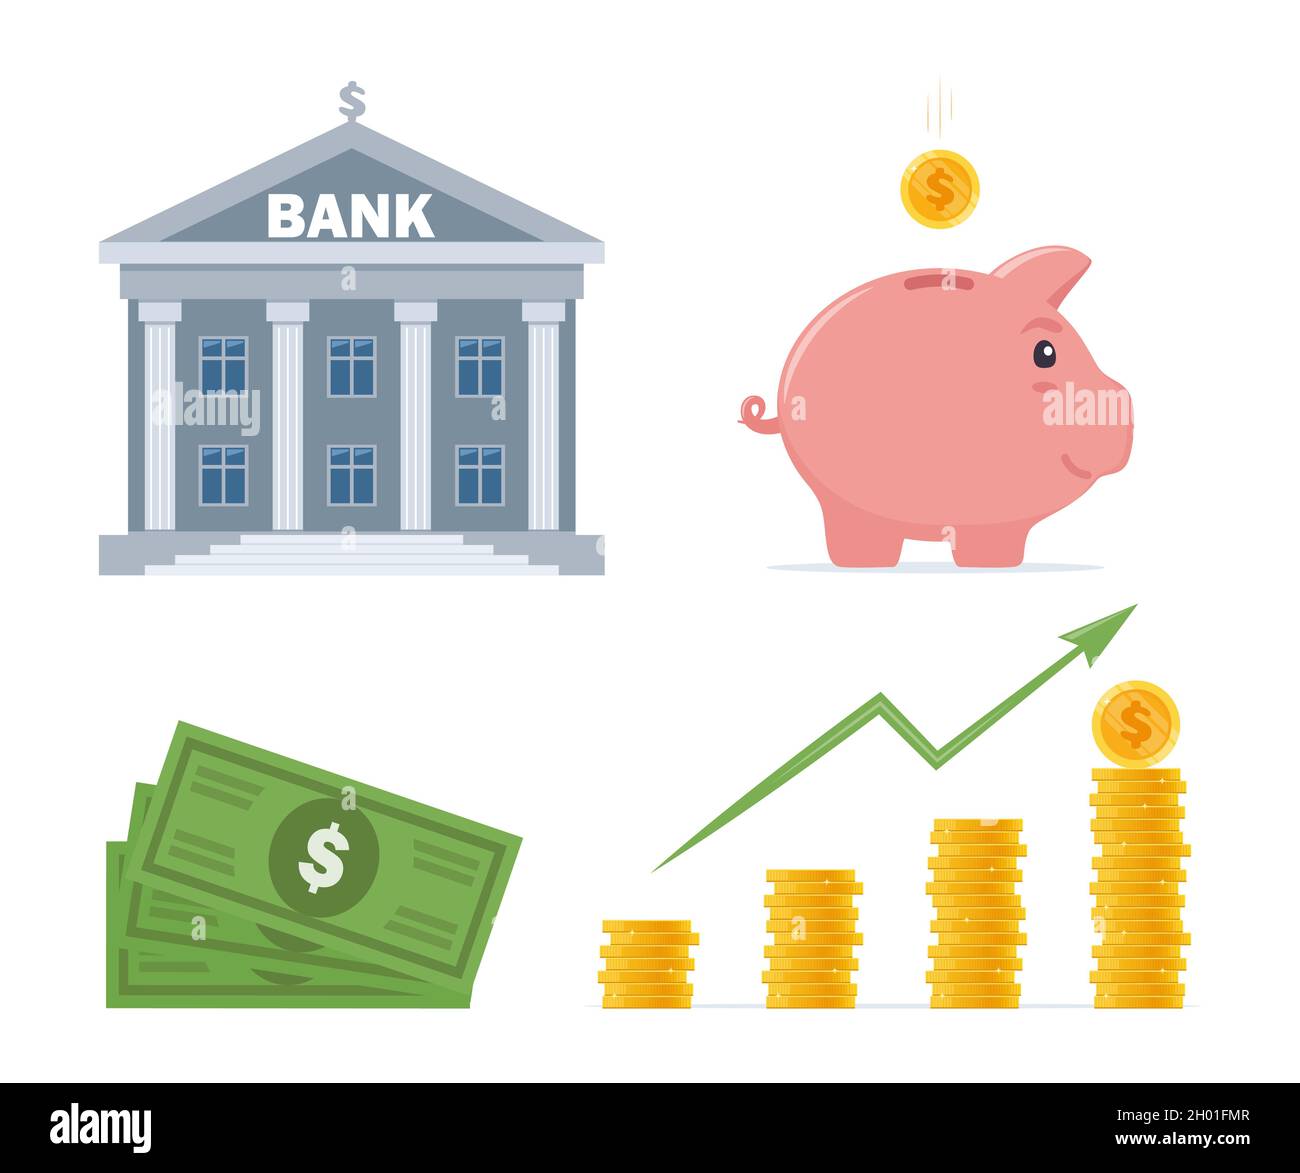 Bank building, piggy bank, dollar banknotes and coins, heap of money and arrow pointing up. Bank financing, money exchange, financial services, ATM, g Stock Vector